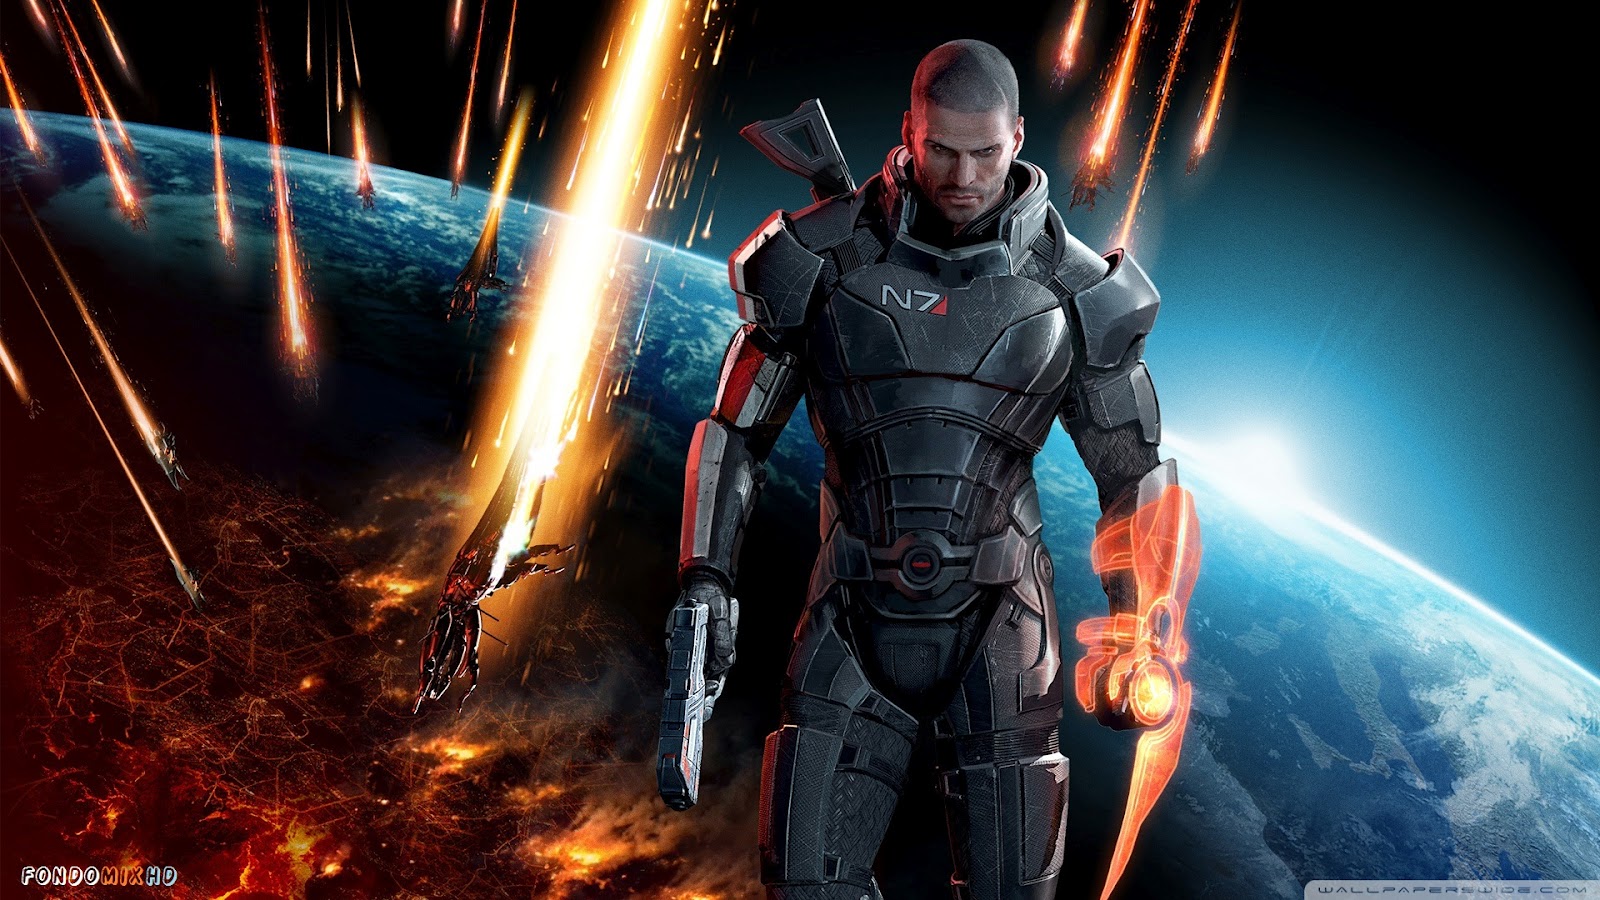 ... , cool pictures, fondos, ecchi y mucho mas: Special Mass Effect 3D